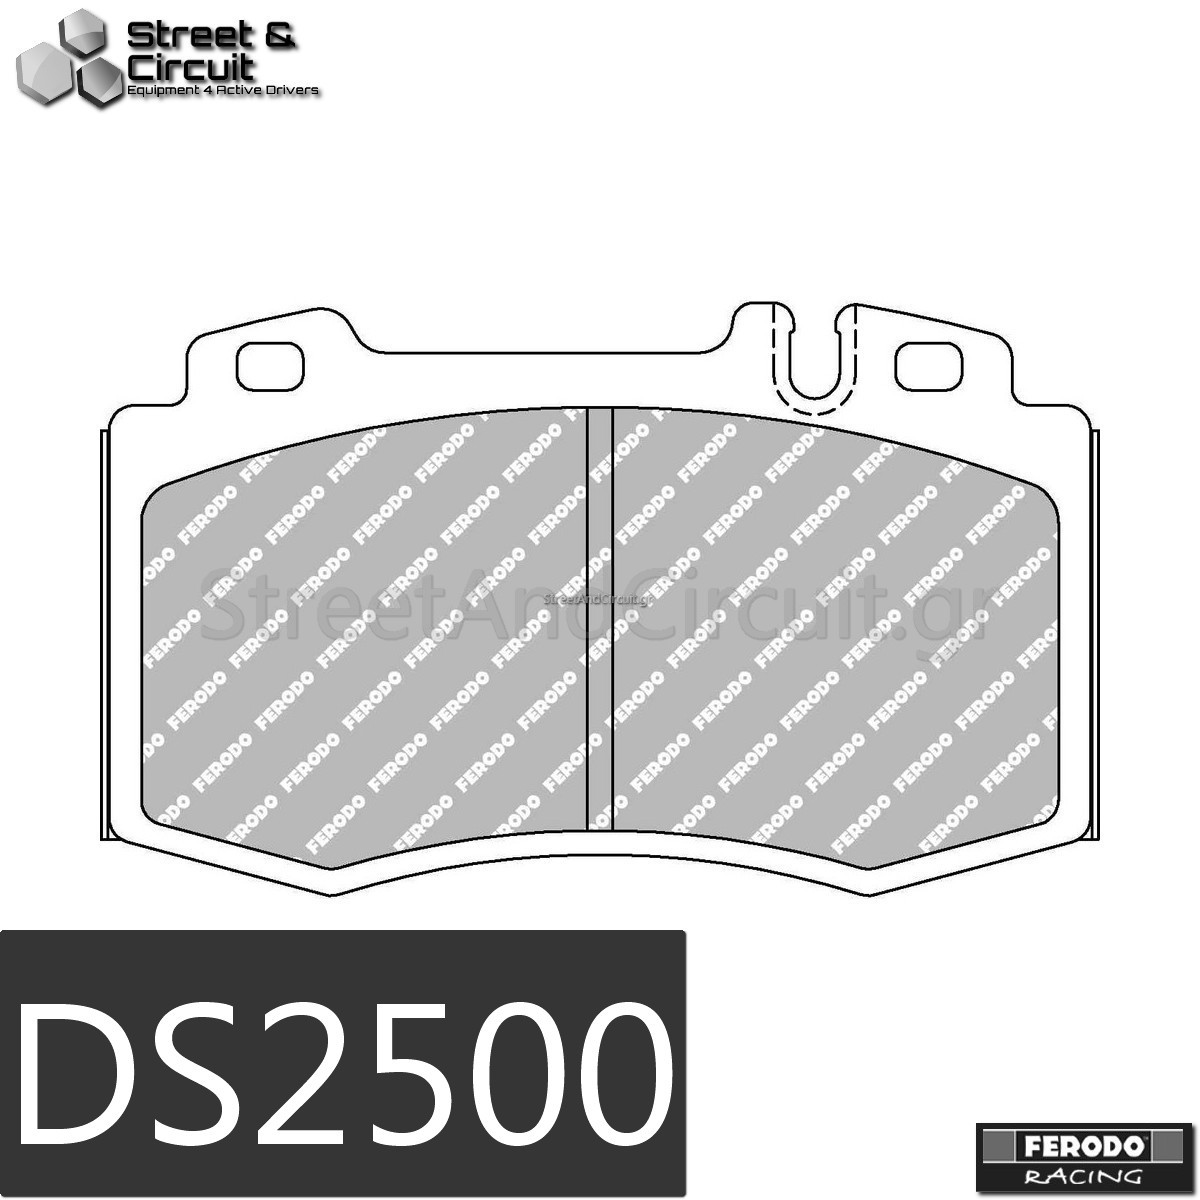 3.2 CDi 24v (S211 ) E320 2002-2009 (FRONT), Brake System: BREMBO - Ferodo Racing Τακάκια *DS2500*